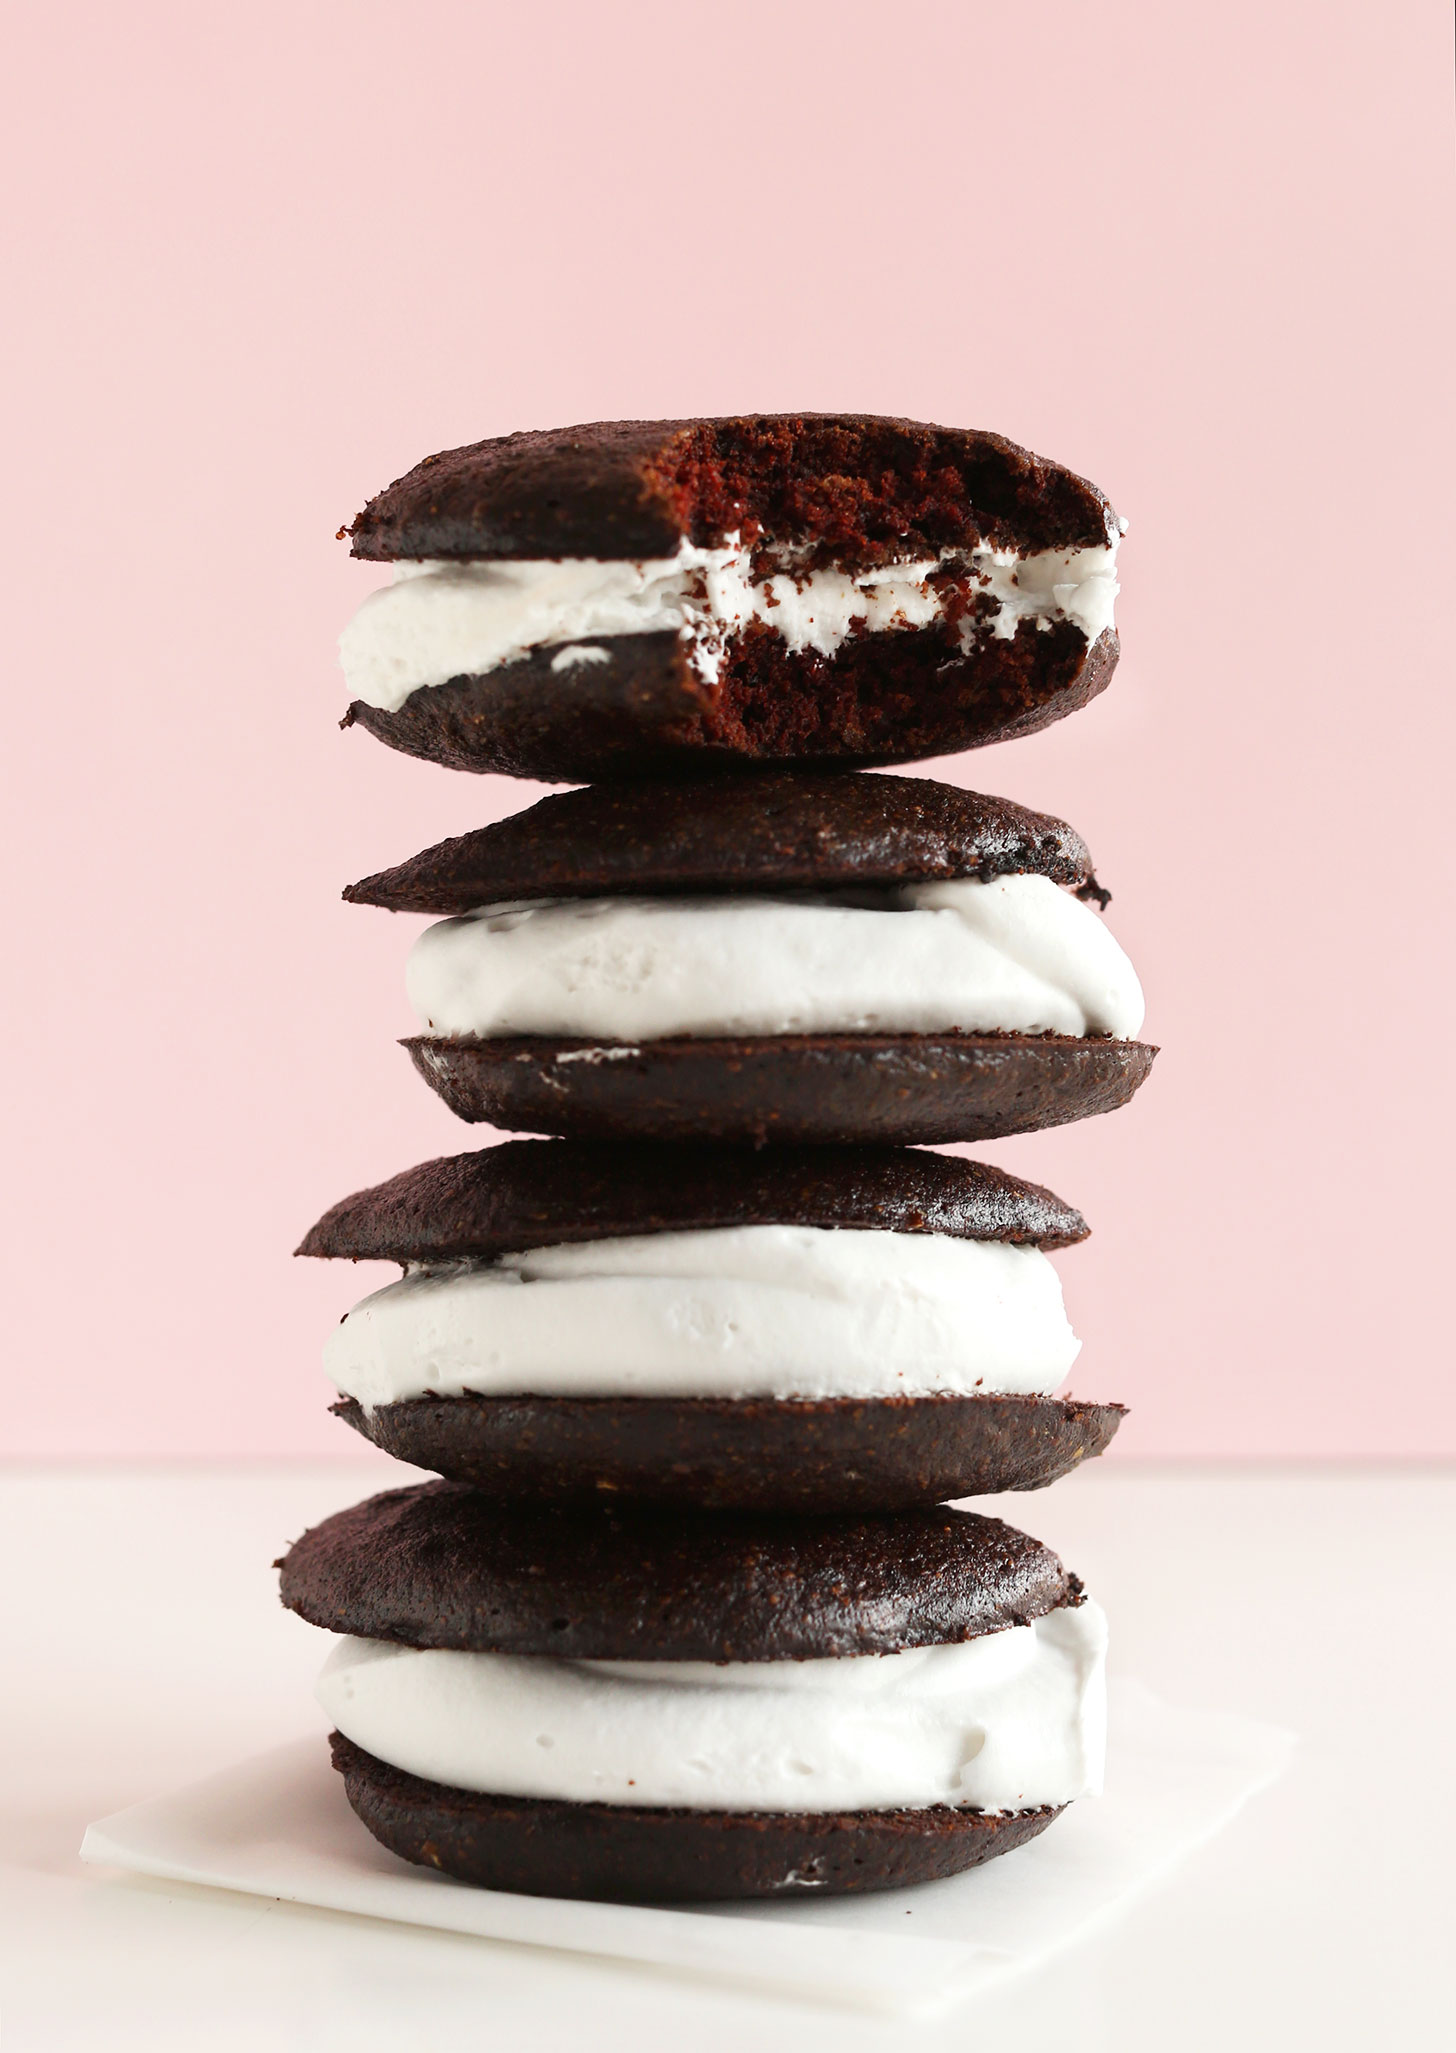 Stack of our delicious gluten-free vegan whoopie pies for dessert